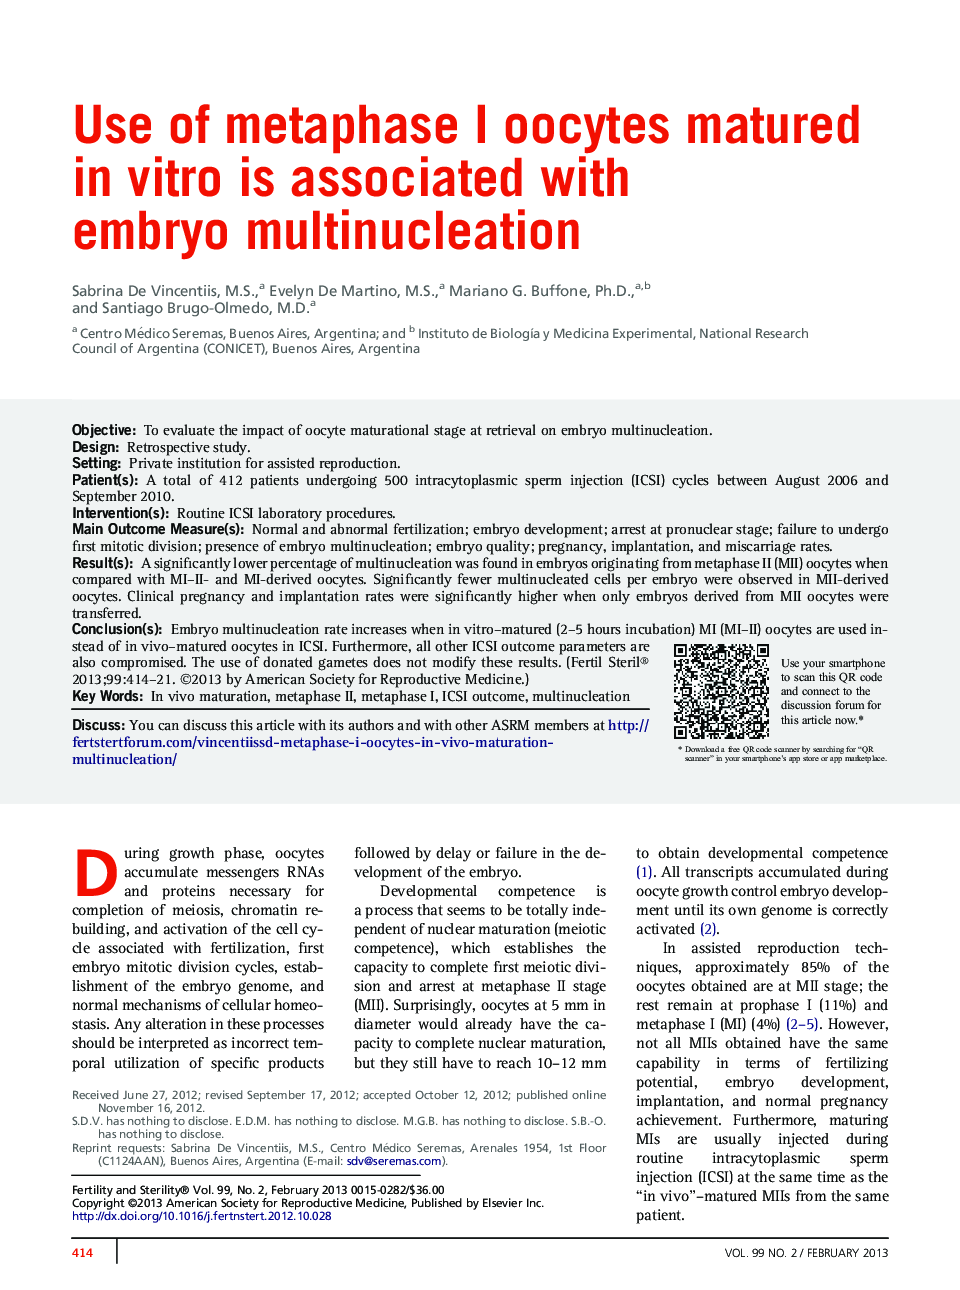 Use of metaphase I oocytes matured in vitro is associated with embryo multinucleation